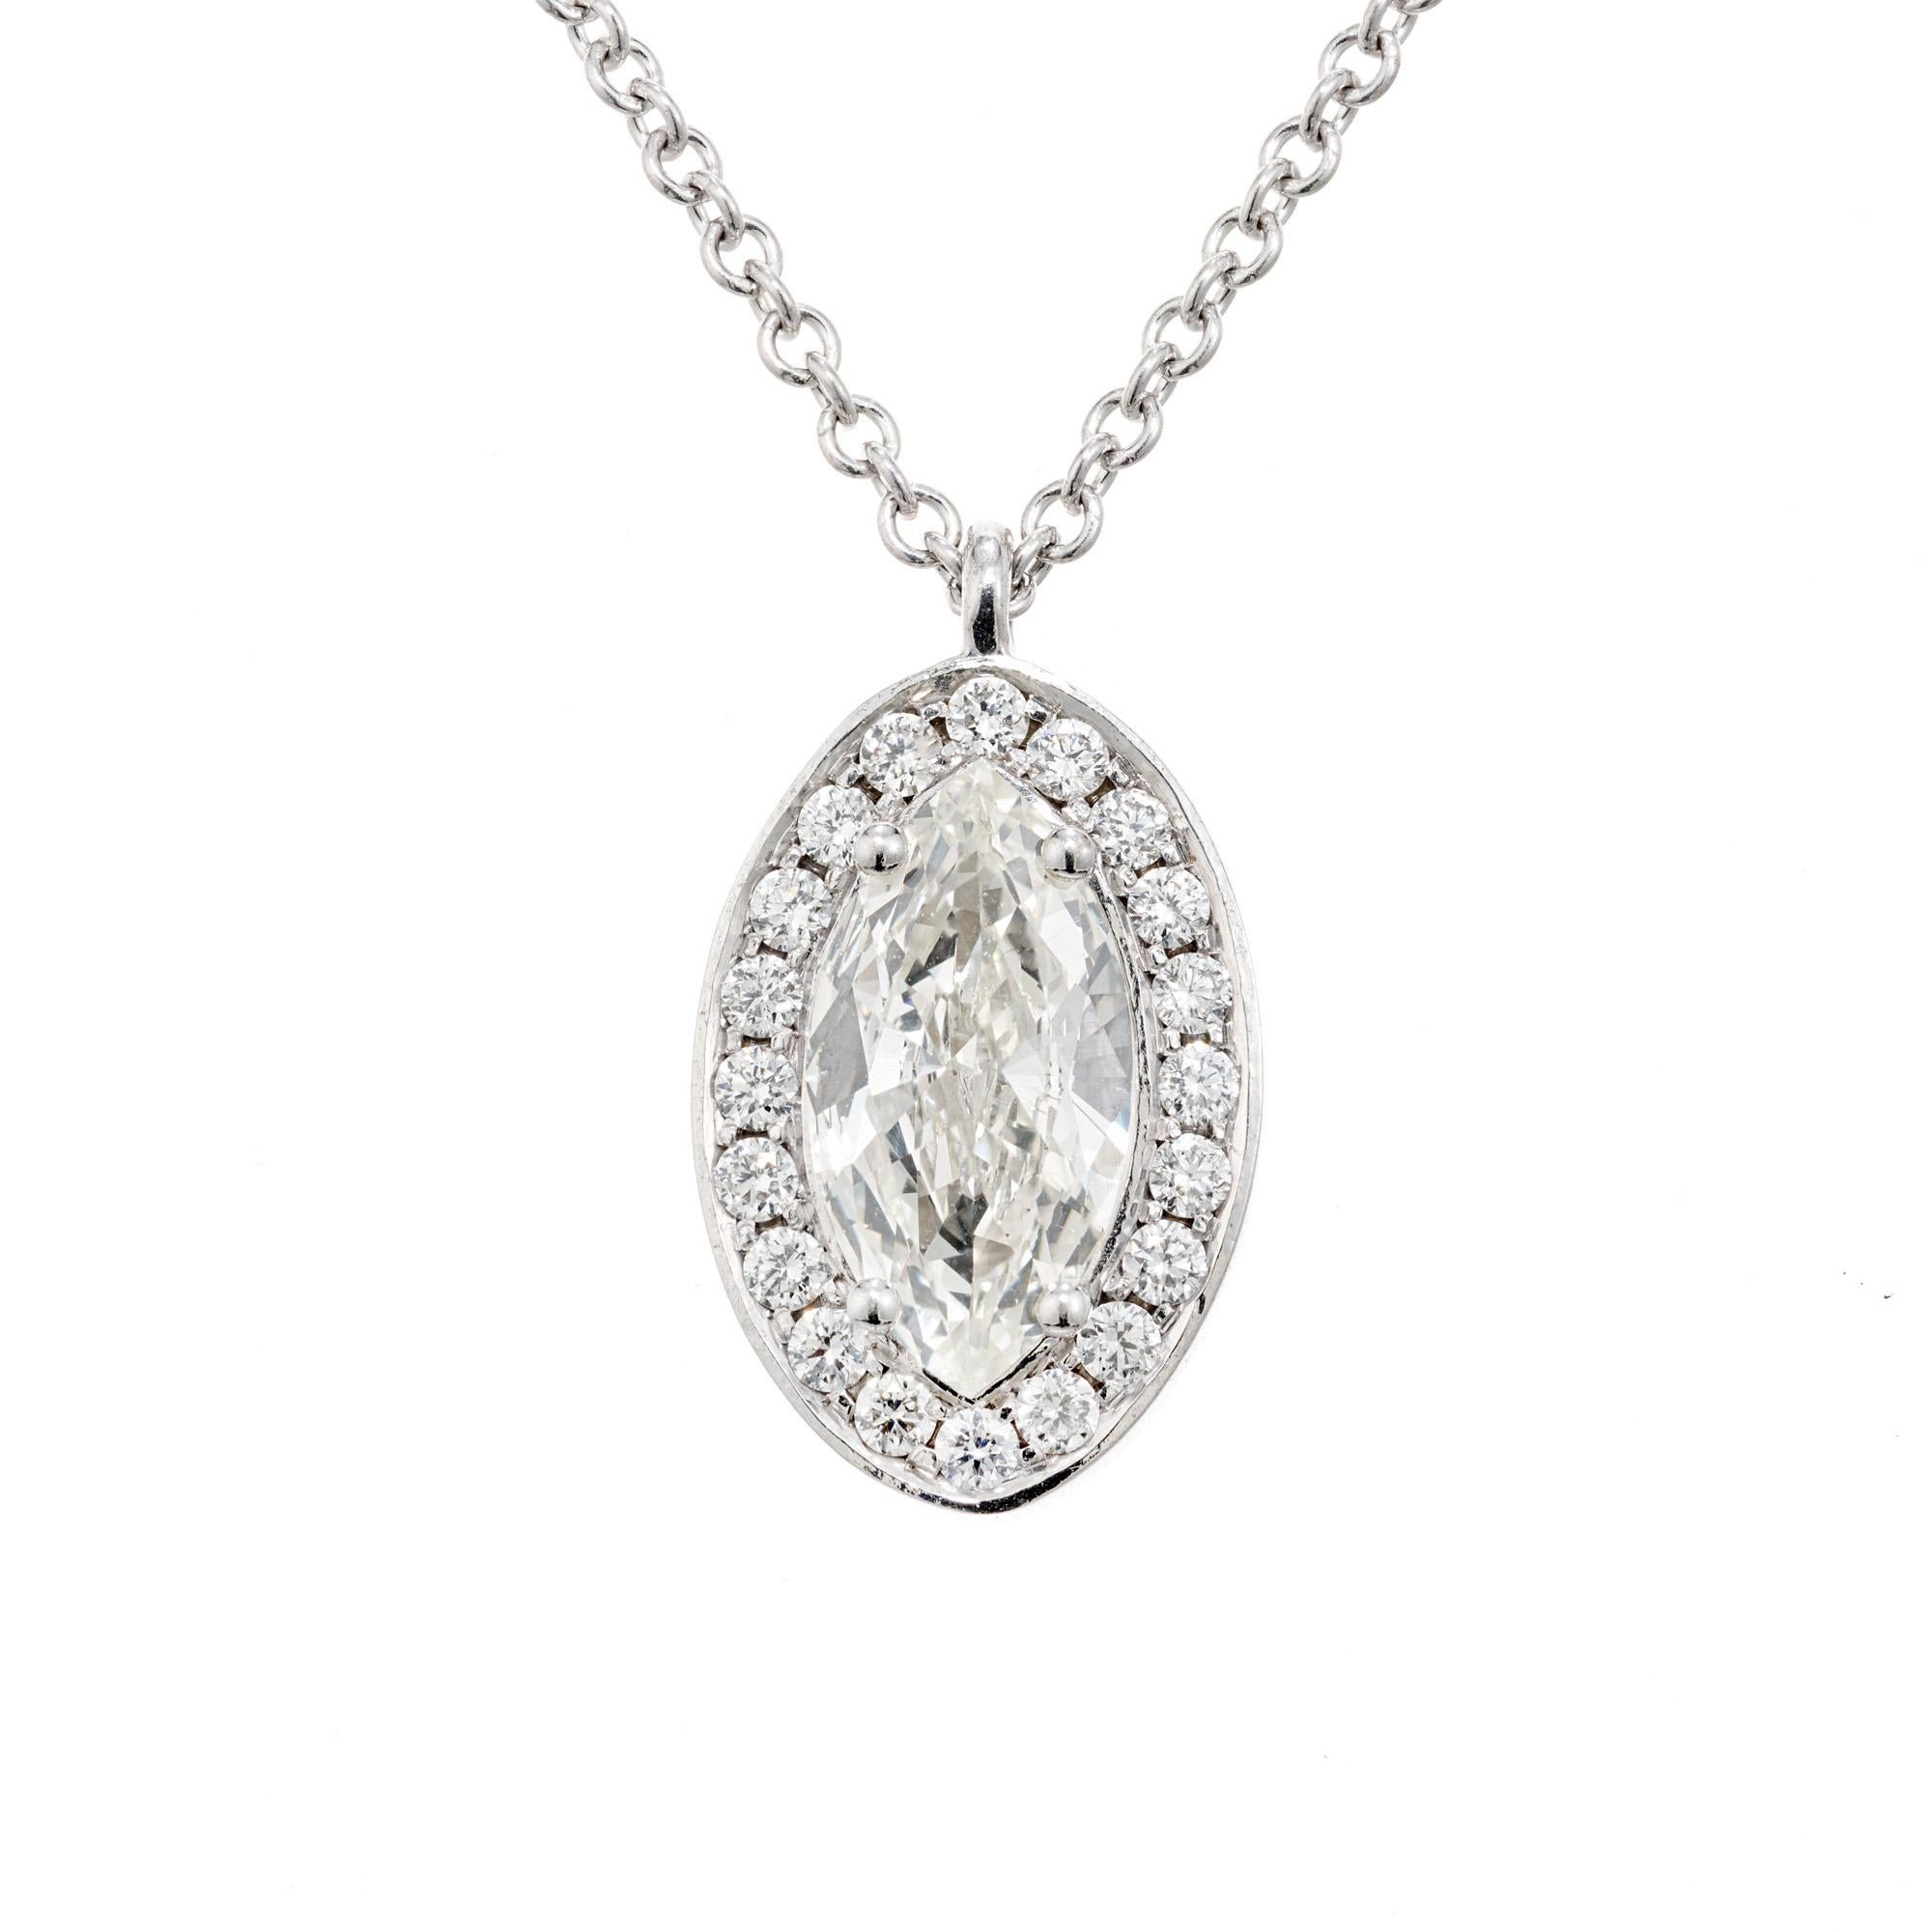 Diamond halo pendant necklace. EGL certified .66 marquise cut center diamond. Mounted in a custom made bezel setting accented with a halo of 20 full cut diamonds. The EGL certified this stone as K-L, slight yellow tone. A 15.25 inch diamond by the